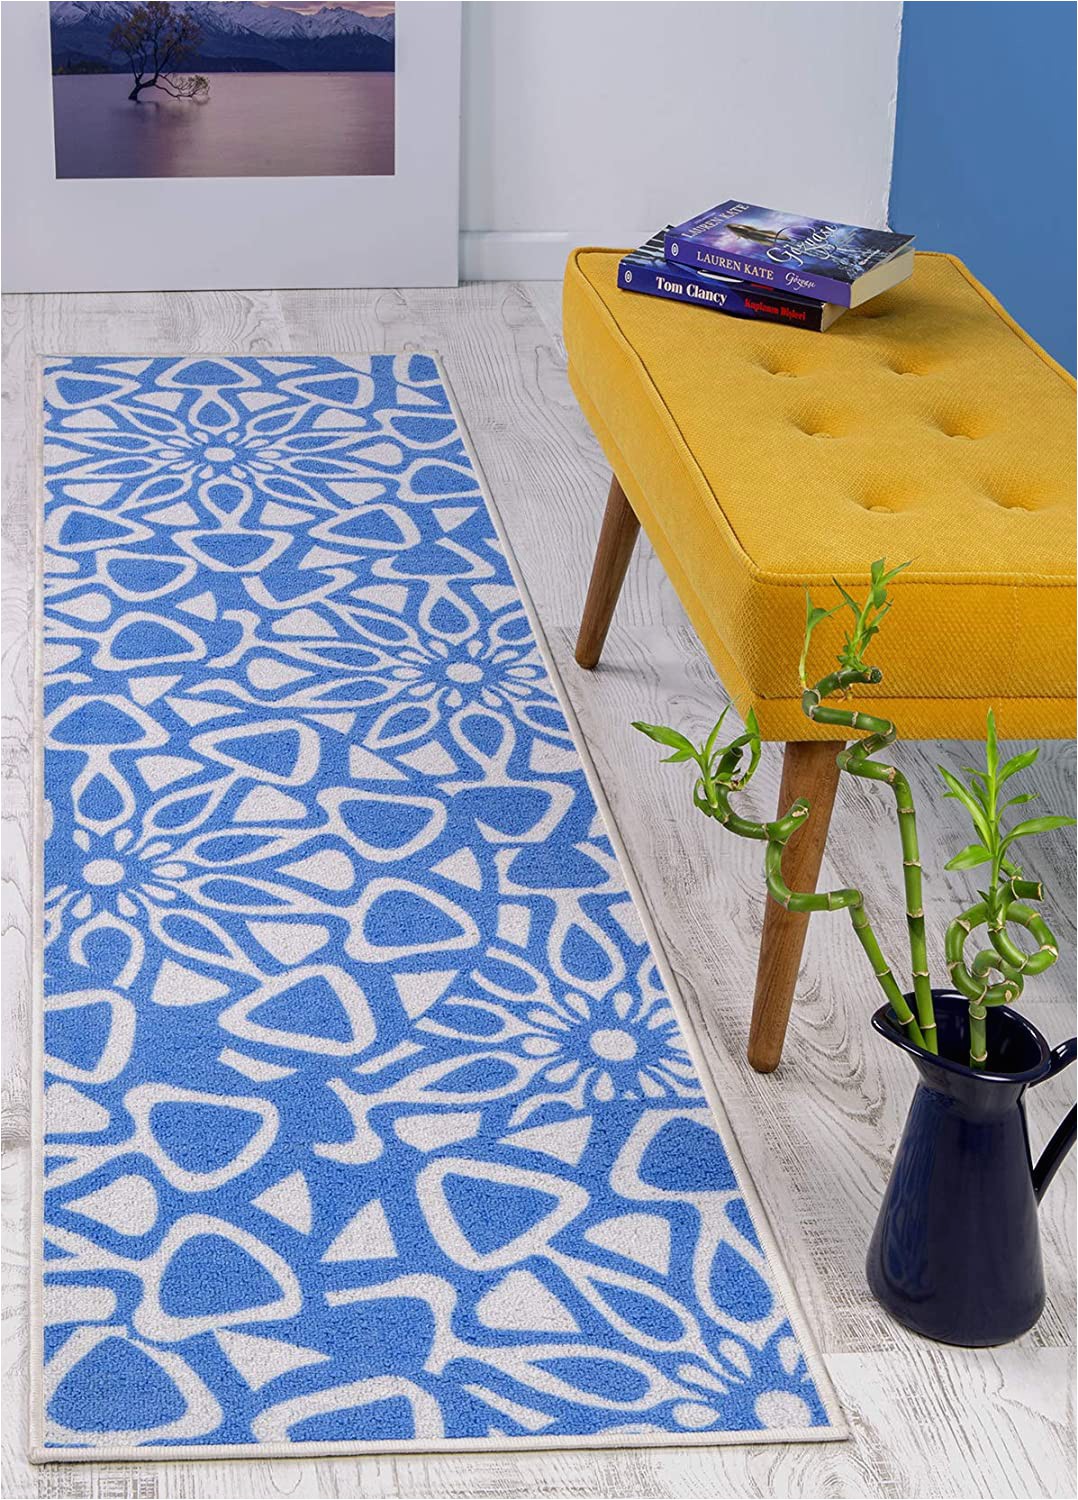 Area Rugs without Rubber Backing Antep Rugs Casa Azul Collection Geometric Contemporary Non Skid Non Slip Low Profile Pile Rubber Backing Indoor area Rug Blue Cream 1 8" X 4 11"